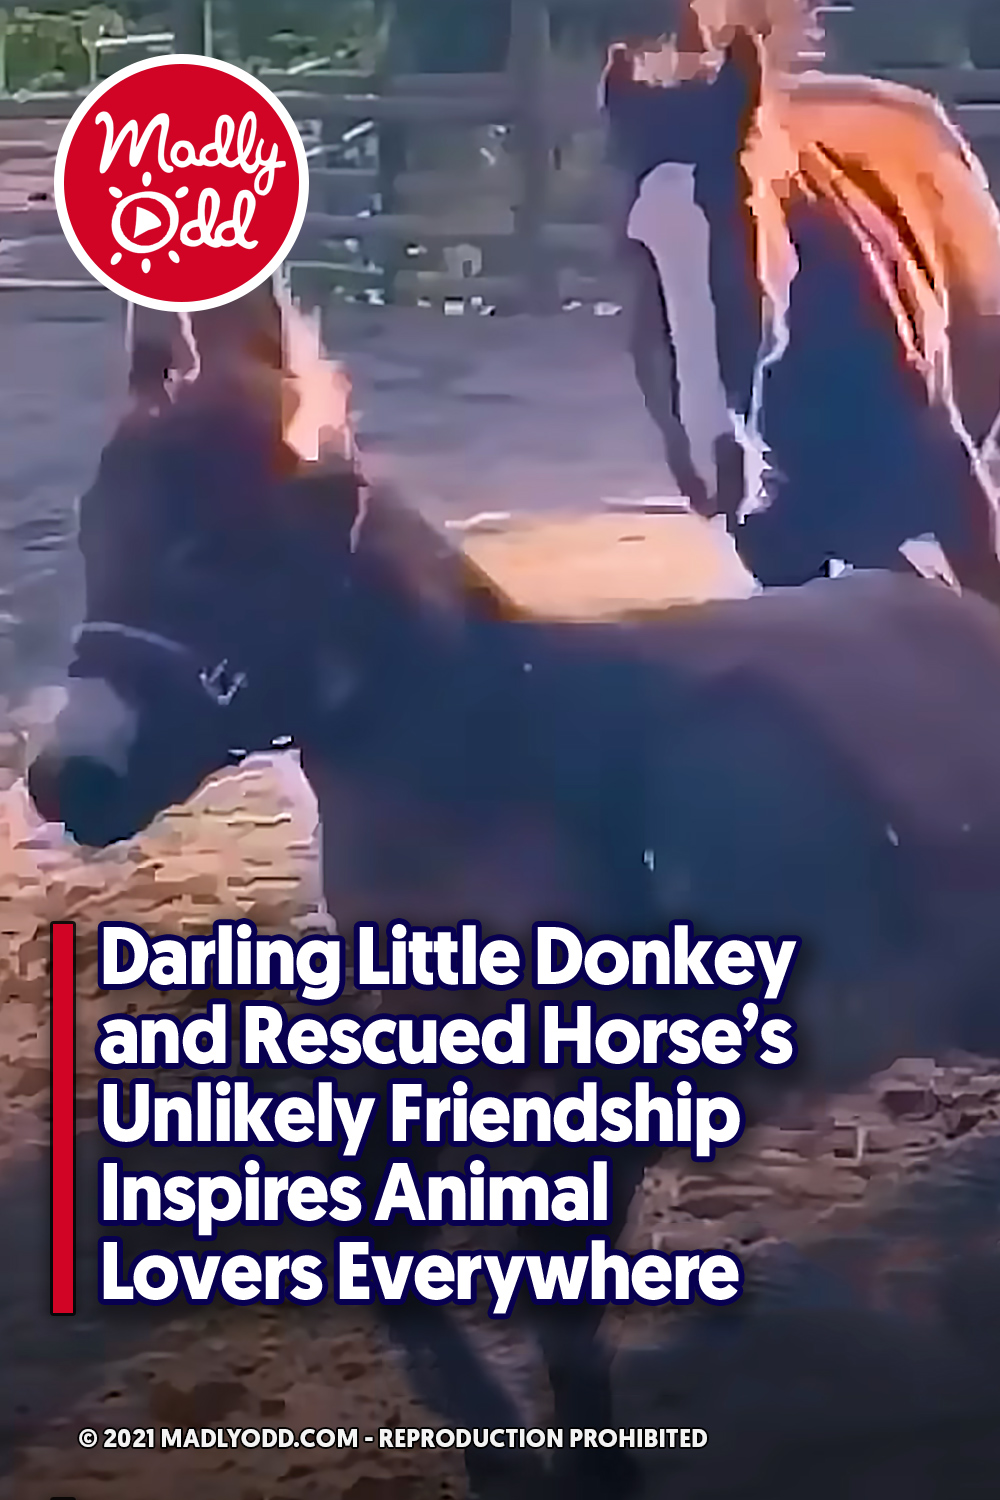 Darling Little Donkey and Rescued Horse’s Unlikely Friendship Inspires Animal Lovers Everywhere